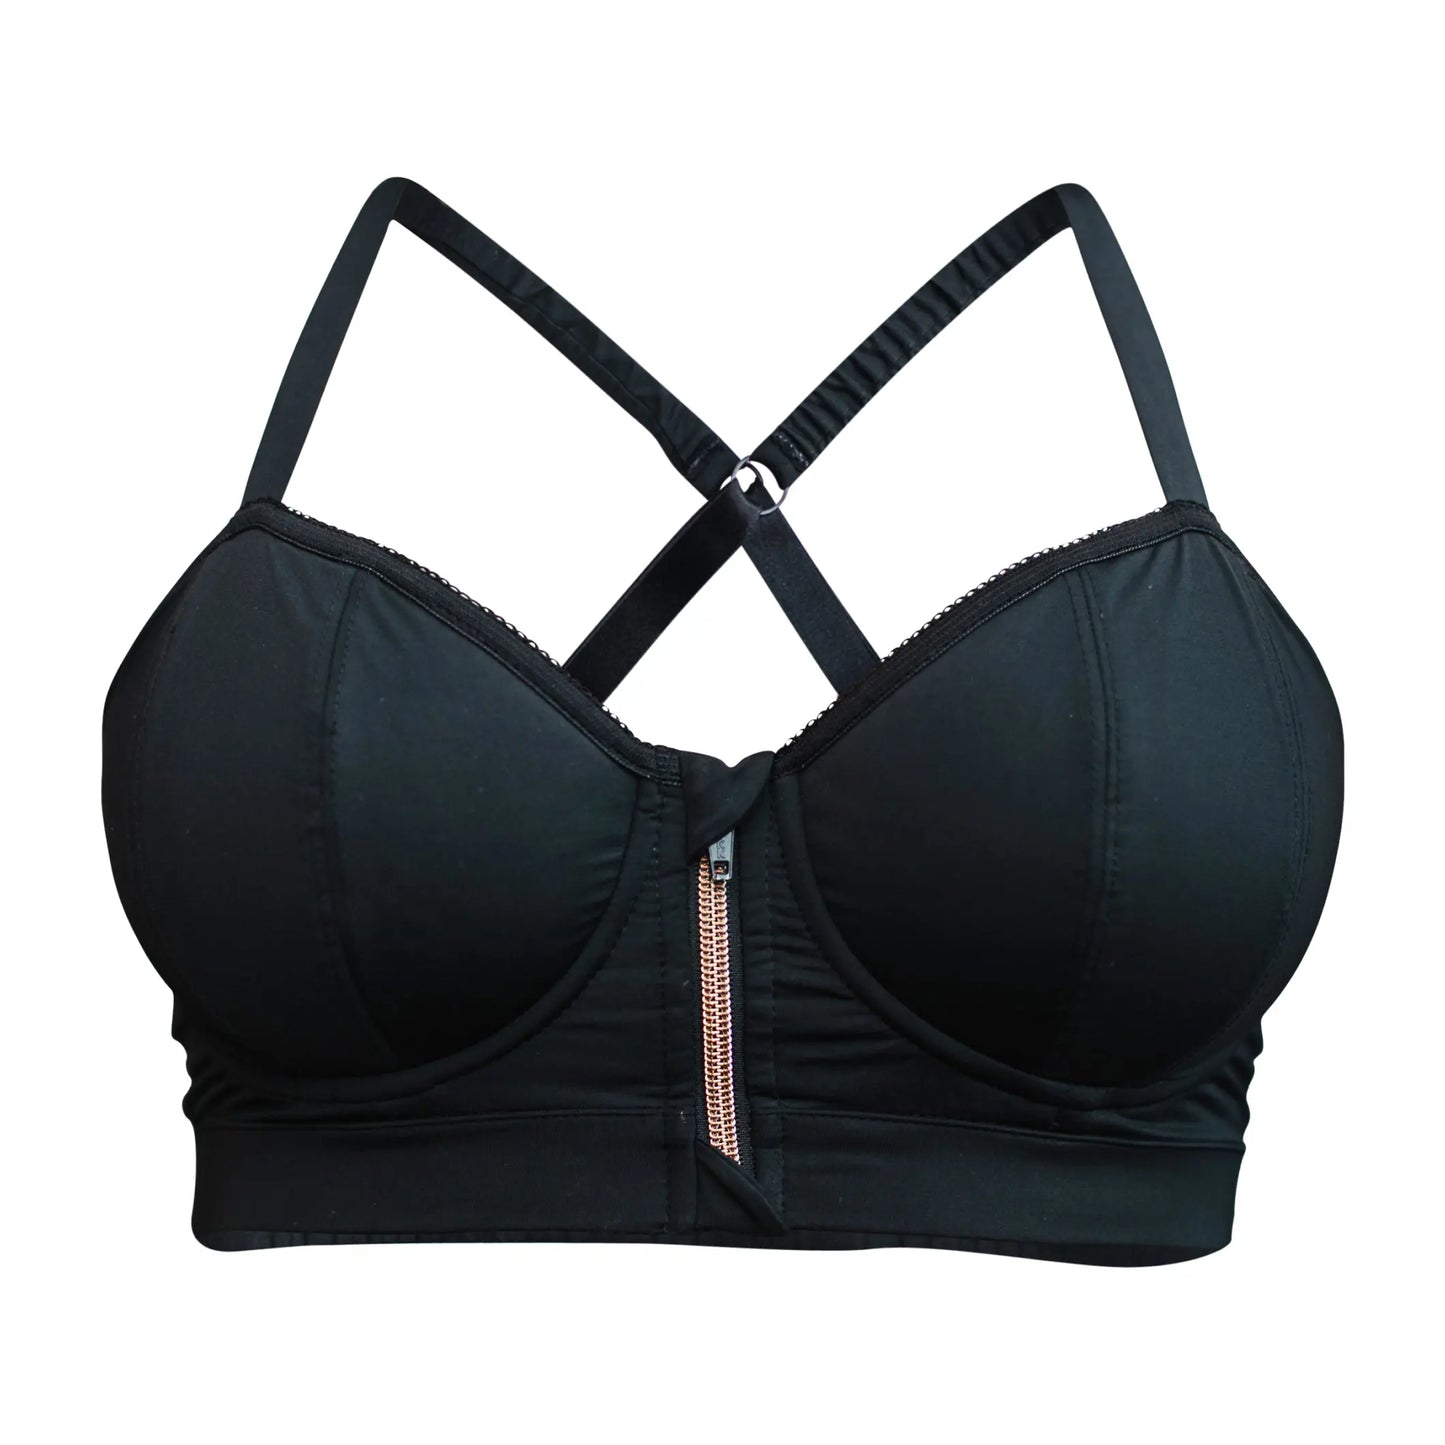 This image depicts the front view of Wildrax Balconette Sports Bra in black with a heart-shaped appearance. The bra features a front zipper closure and cups designed to accommodate those with a fuller bust.